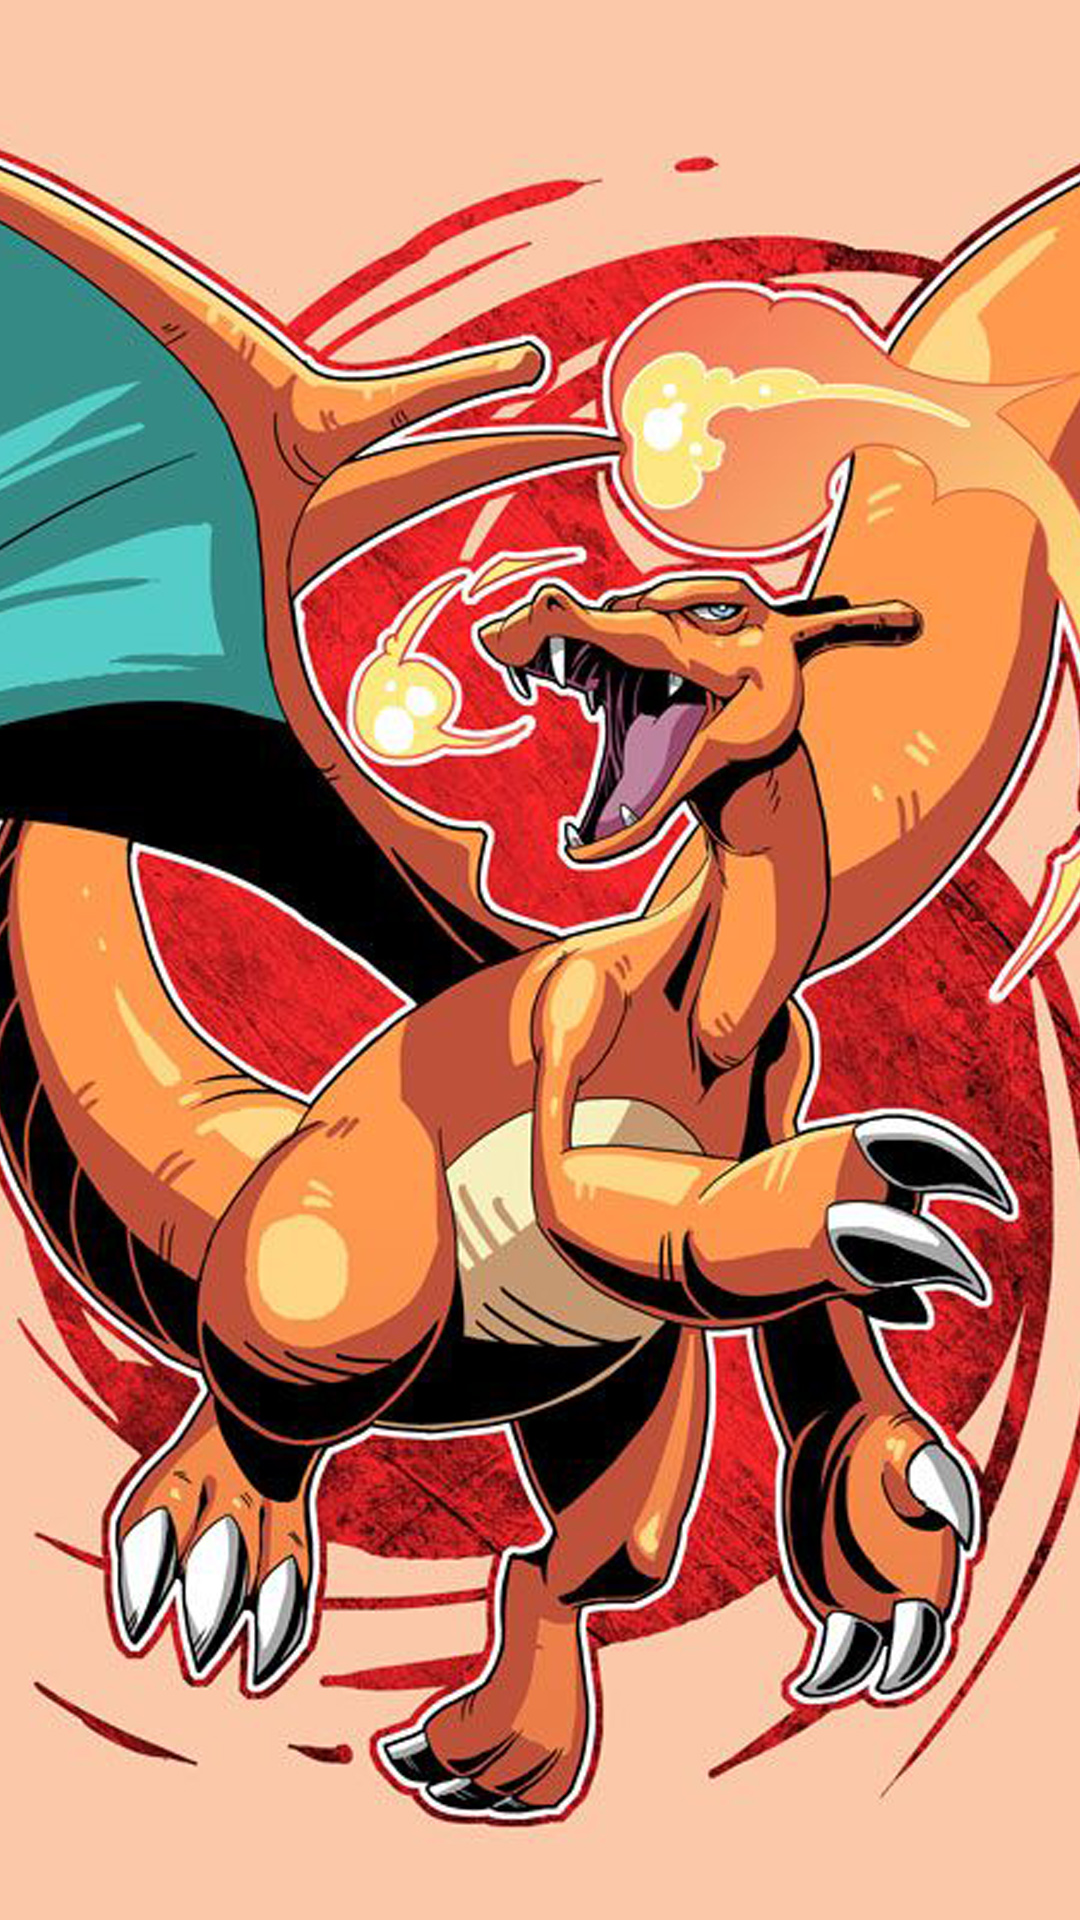 Charmander Go Pokemon Android wallpaper - Android HD wallpapers